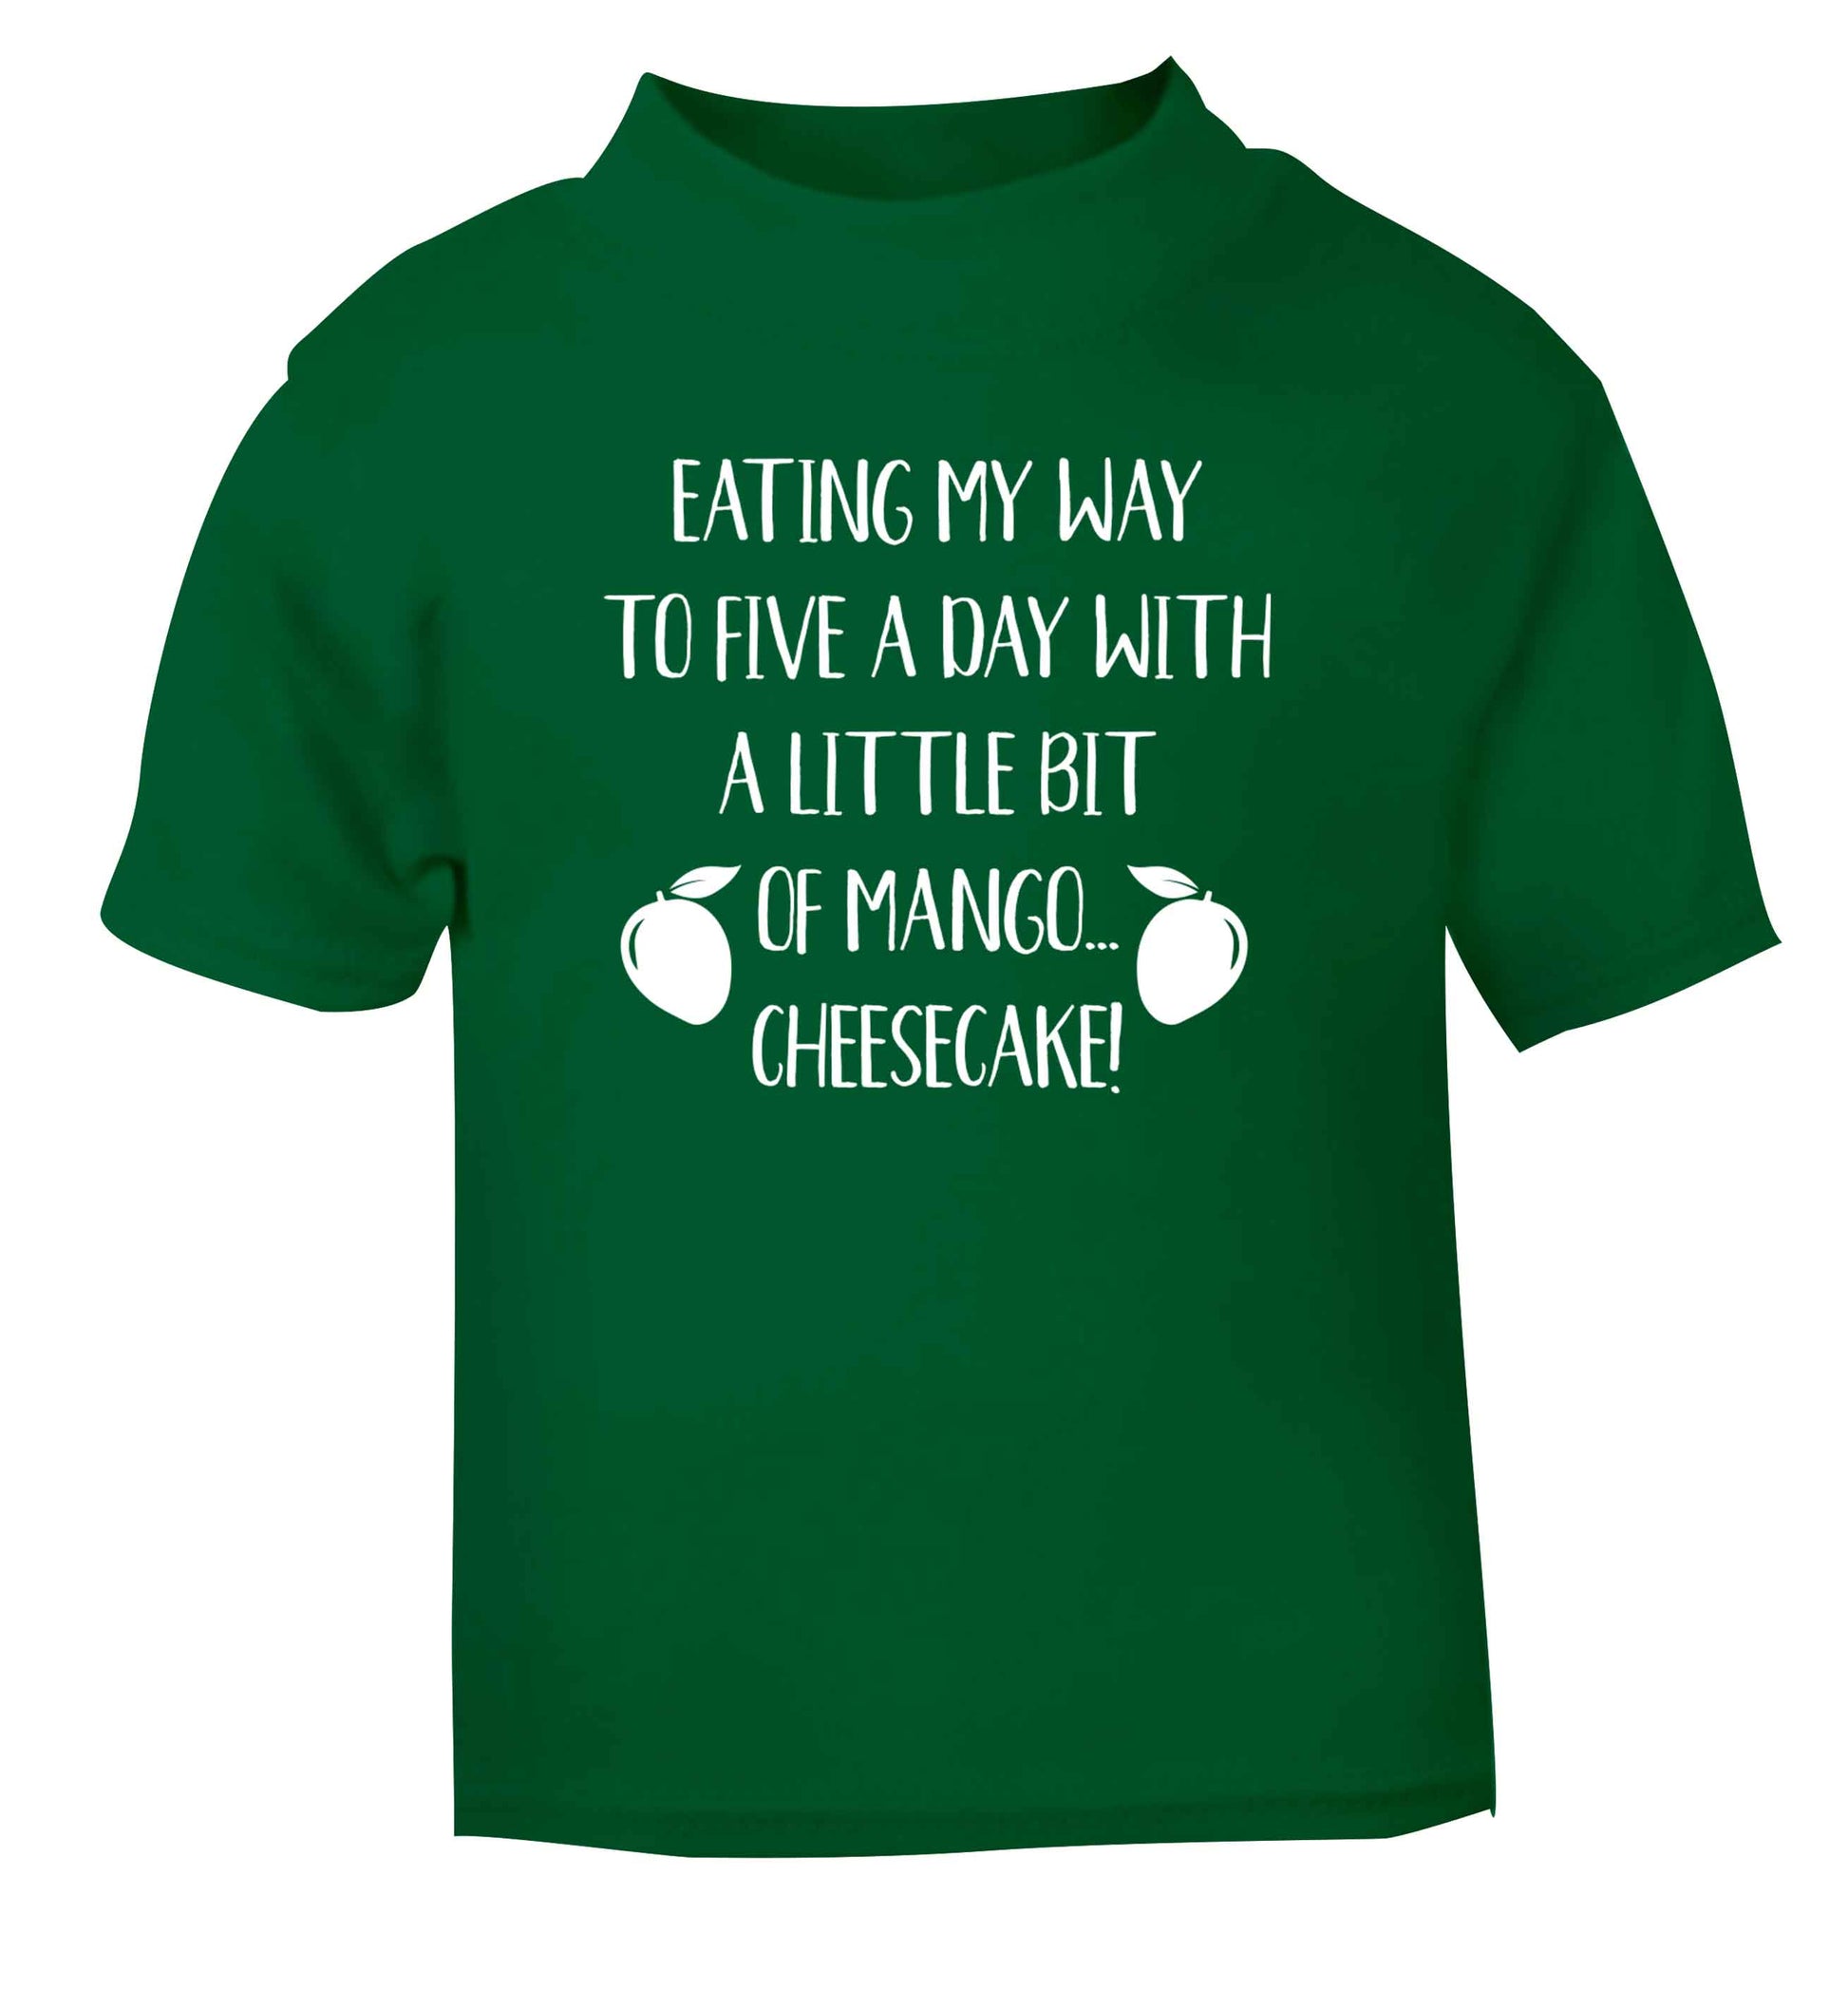 Eating my way to five a day with a little bit of mango cheesecake green Baby Toddler Tshirt 2 Years